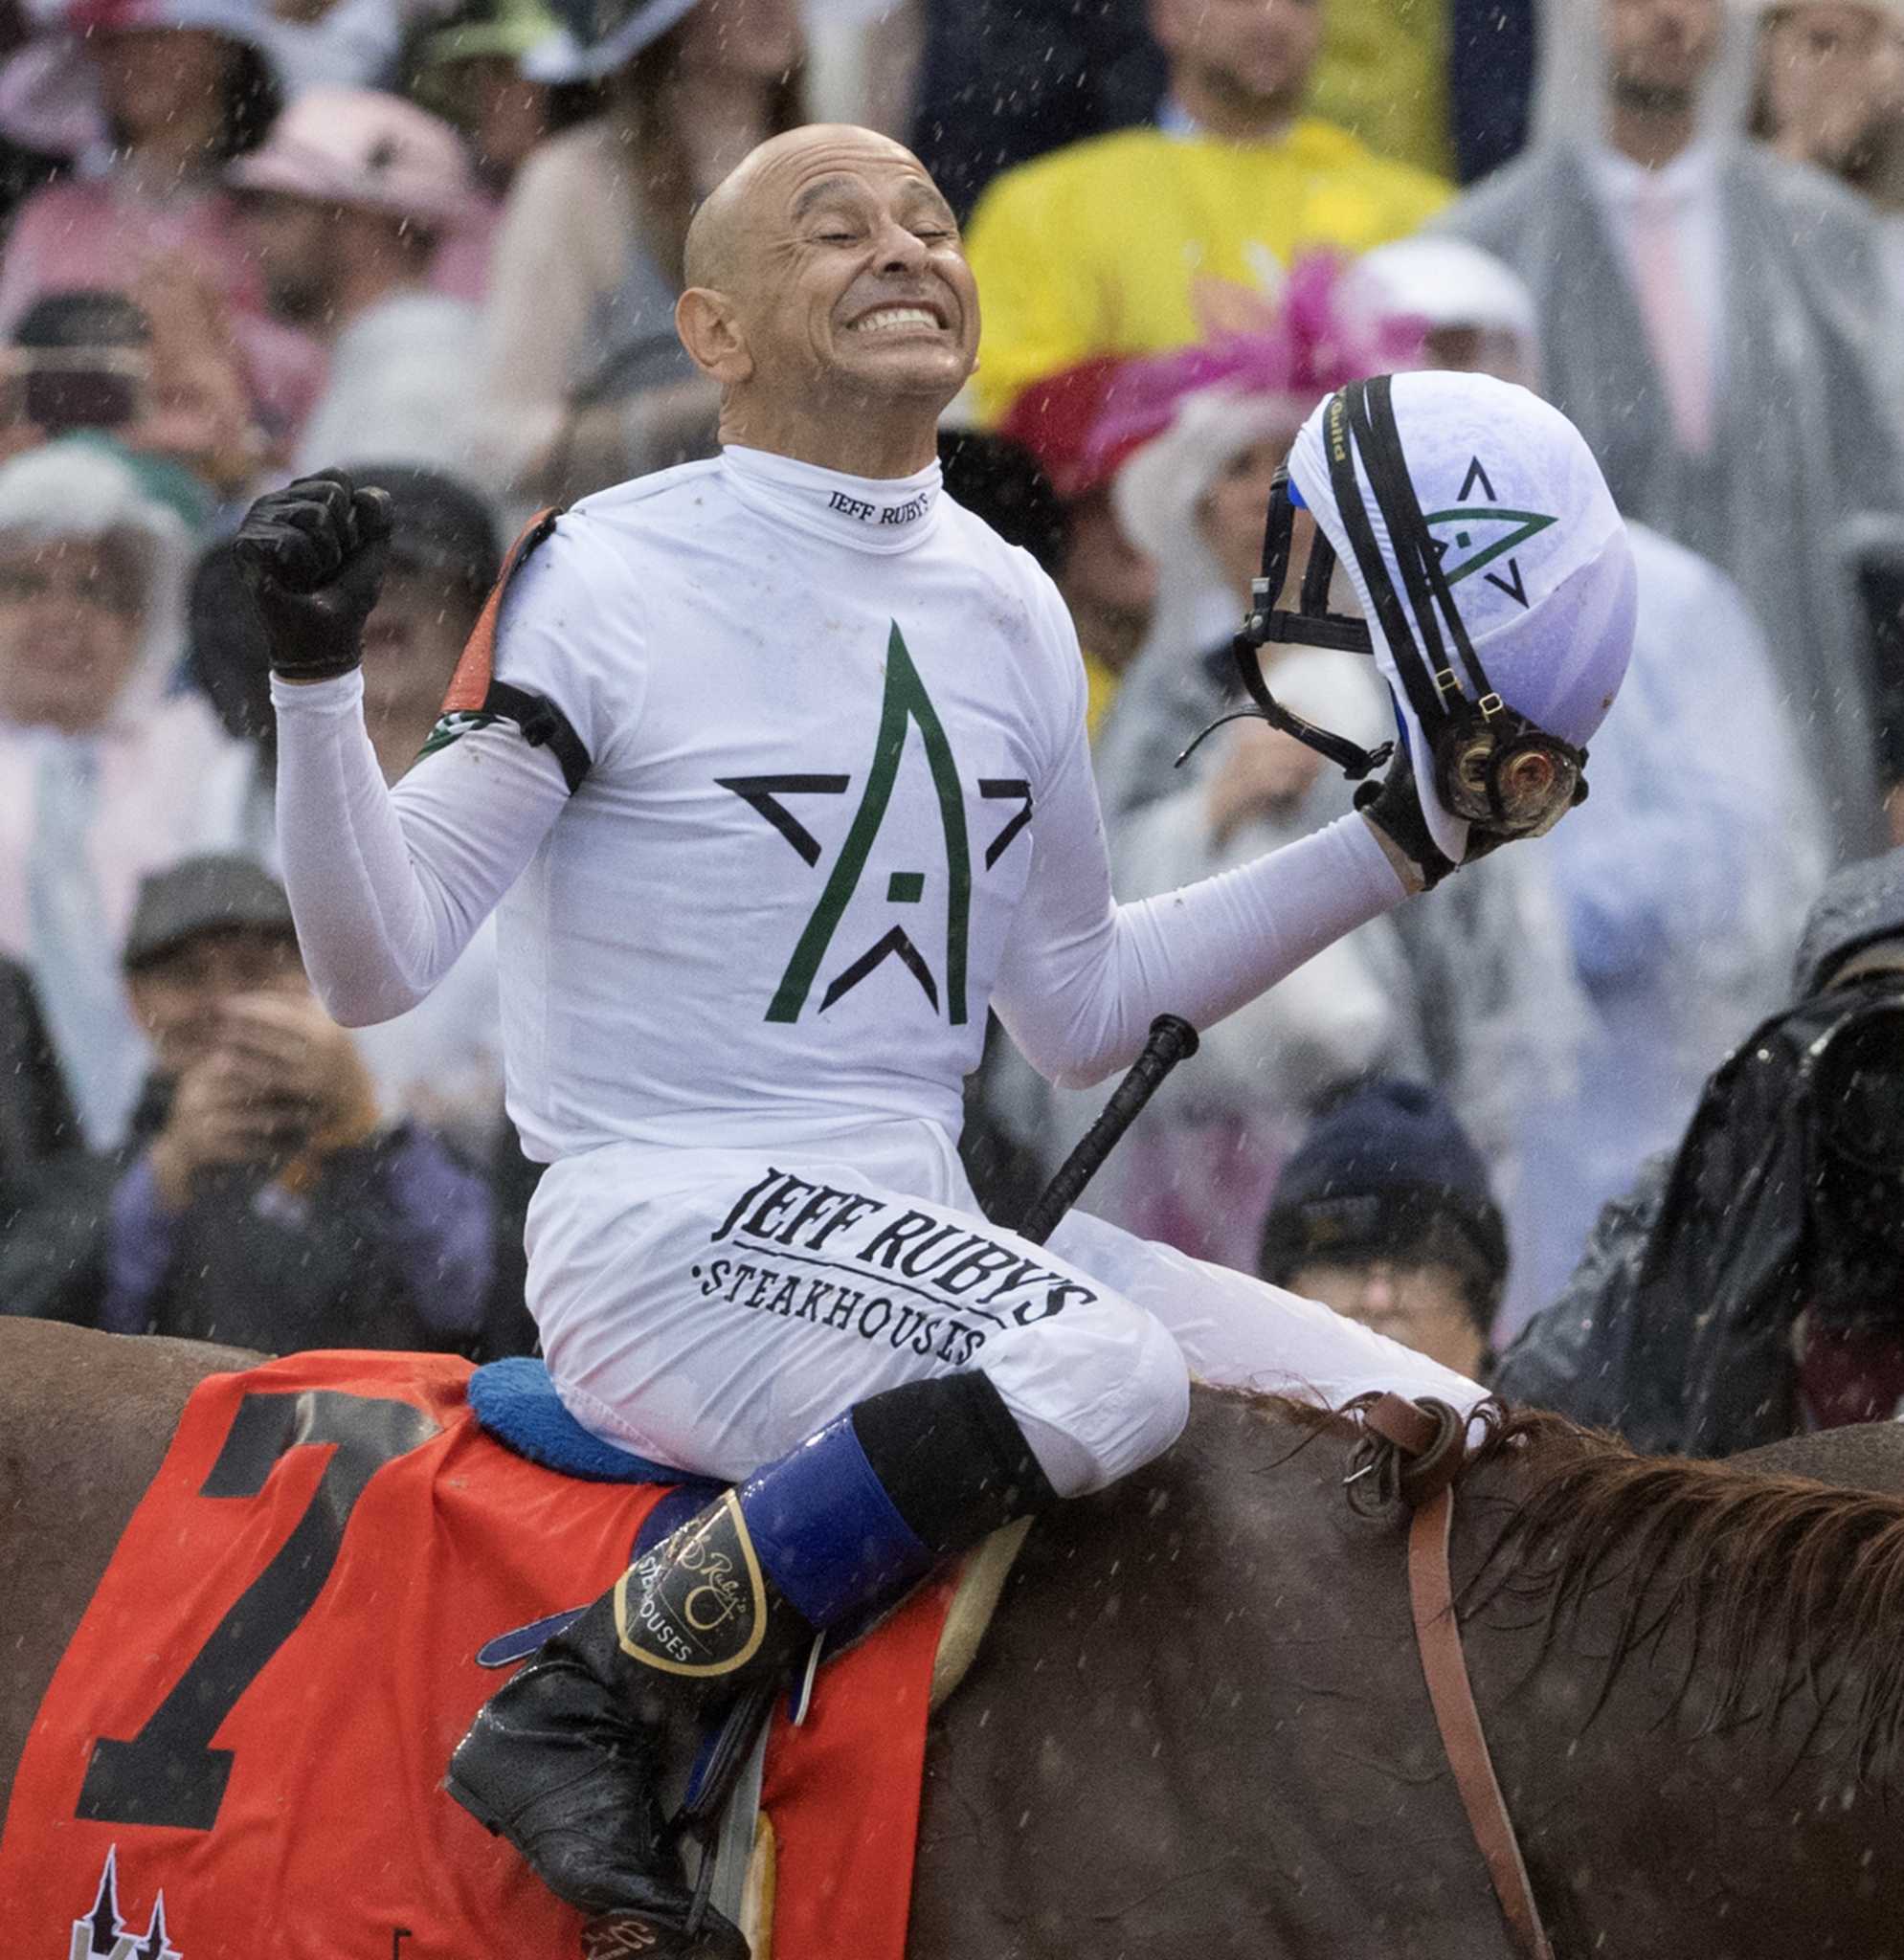 At 52, jockey Mike Smith has the ride of his life